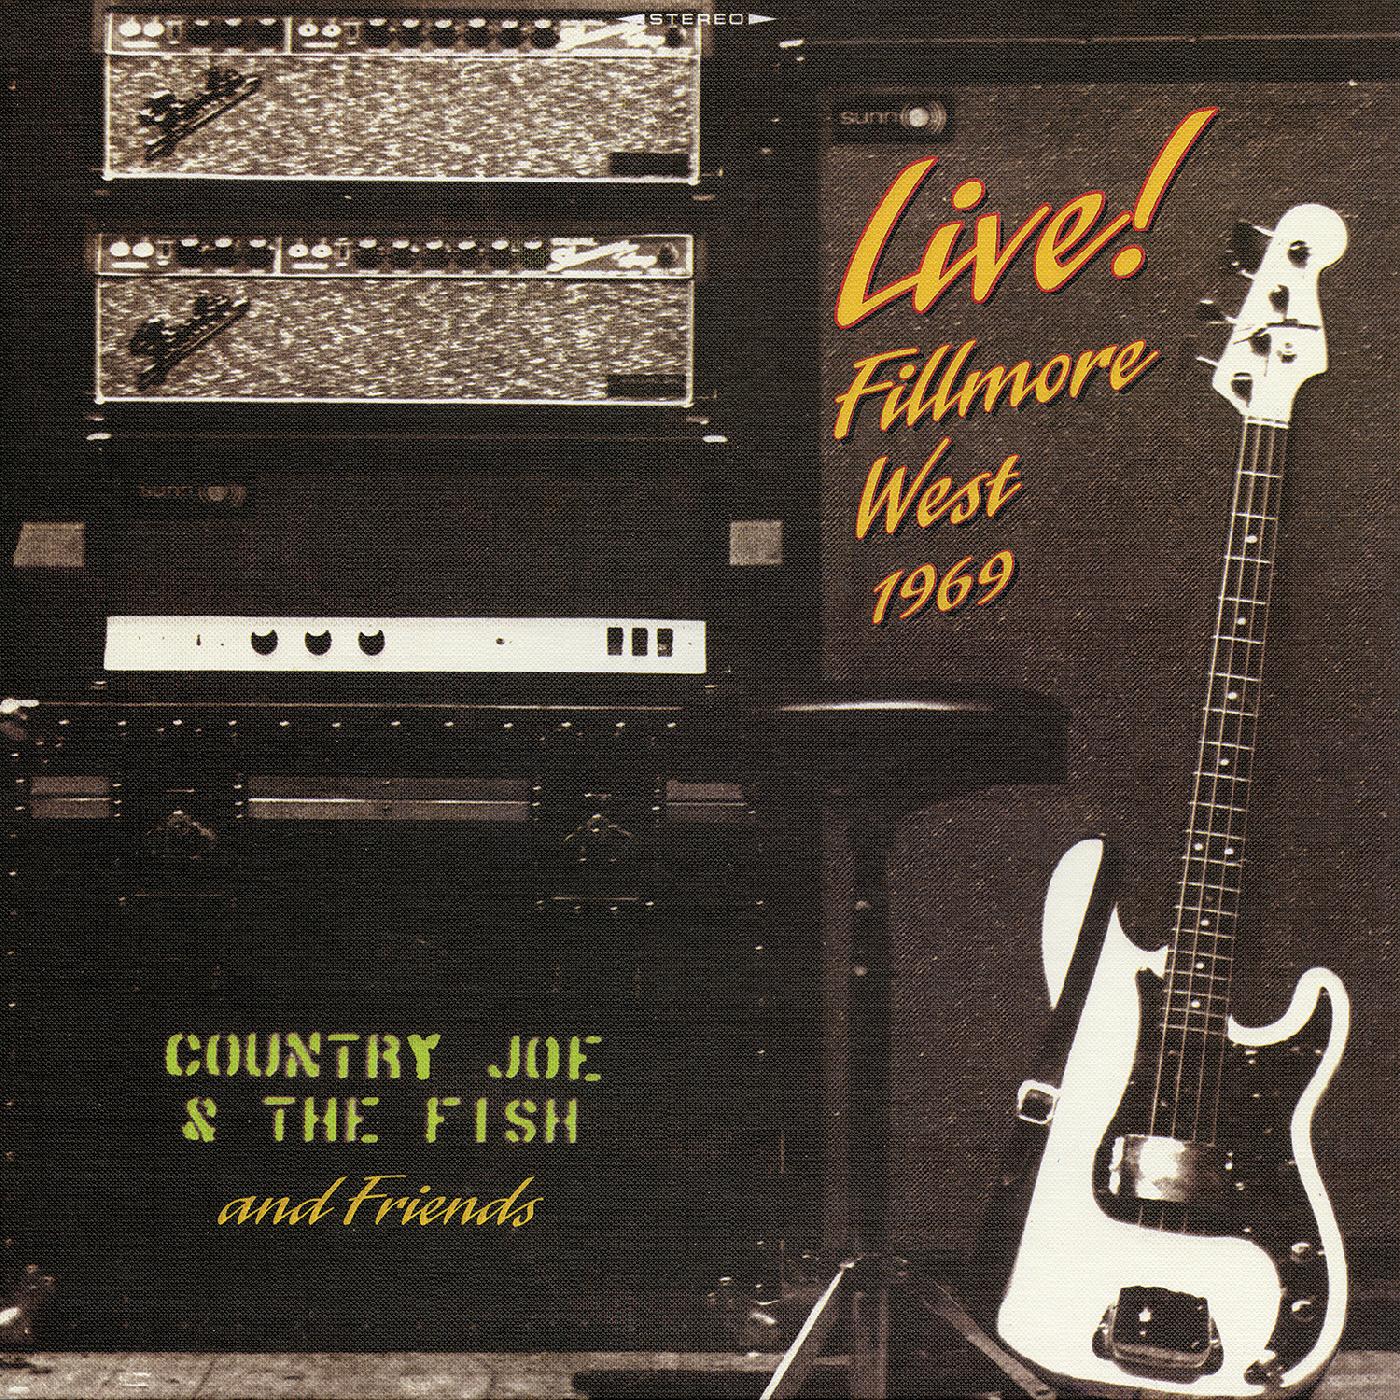 Country Joe & The Fish And Friends - Live! Fillmore West 1969 (Limited 50Th Anniversary 2-LP Yellow Vinyl Edition)